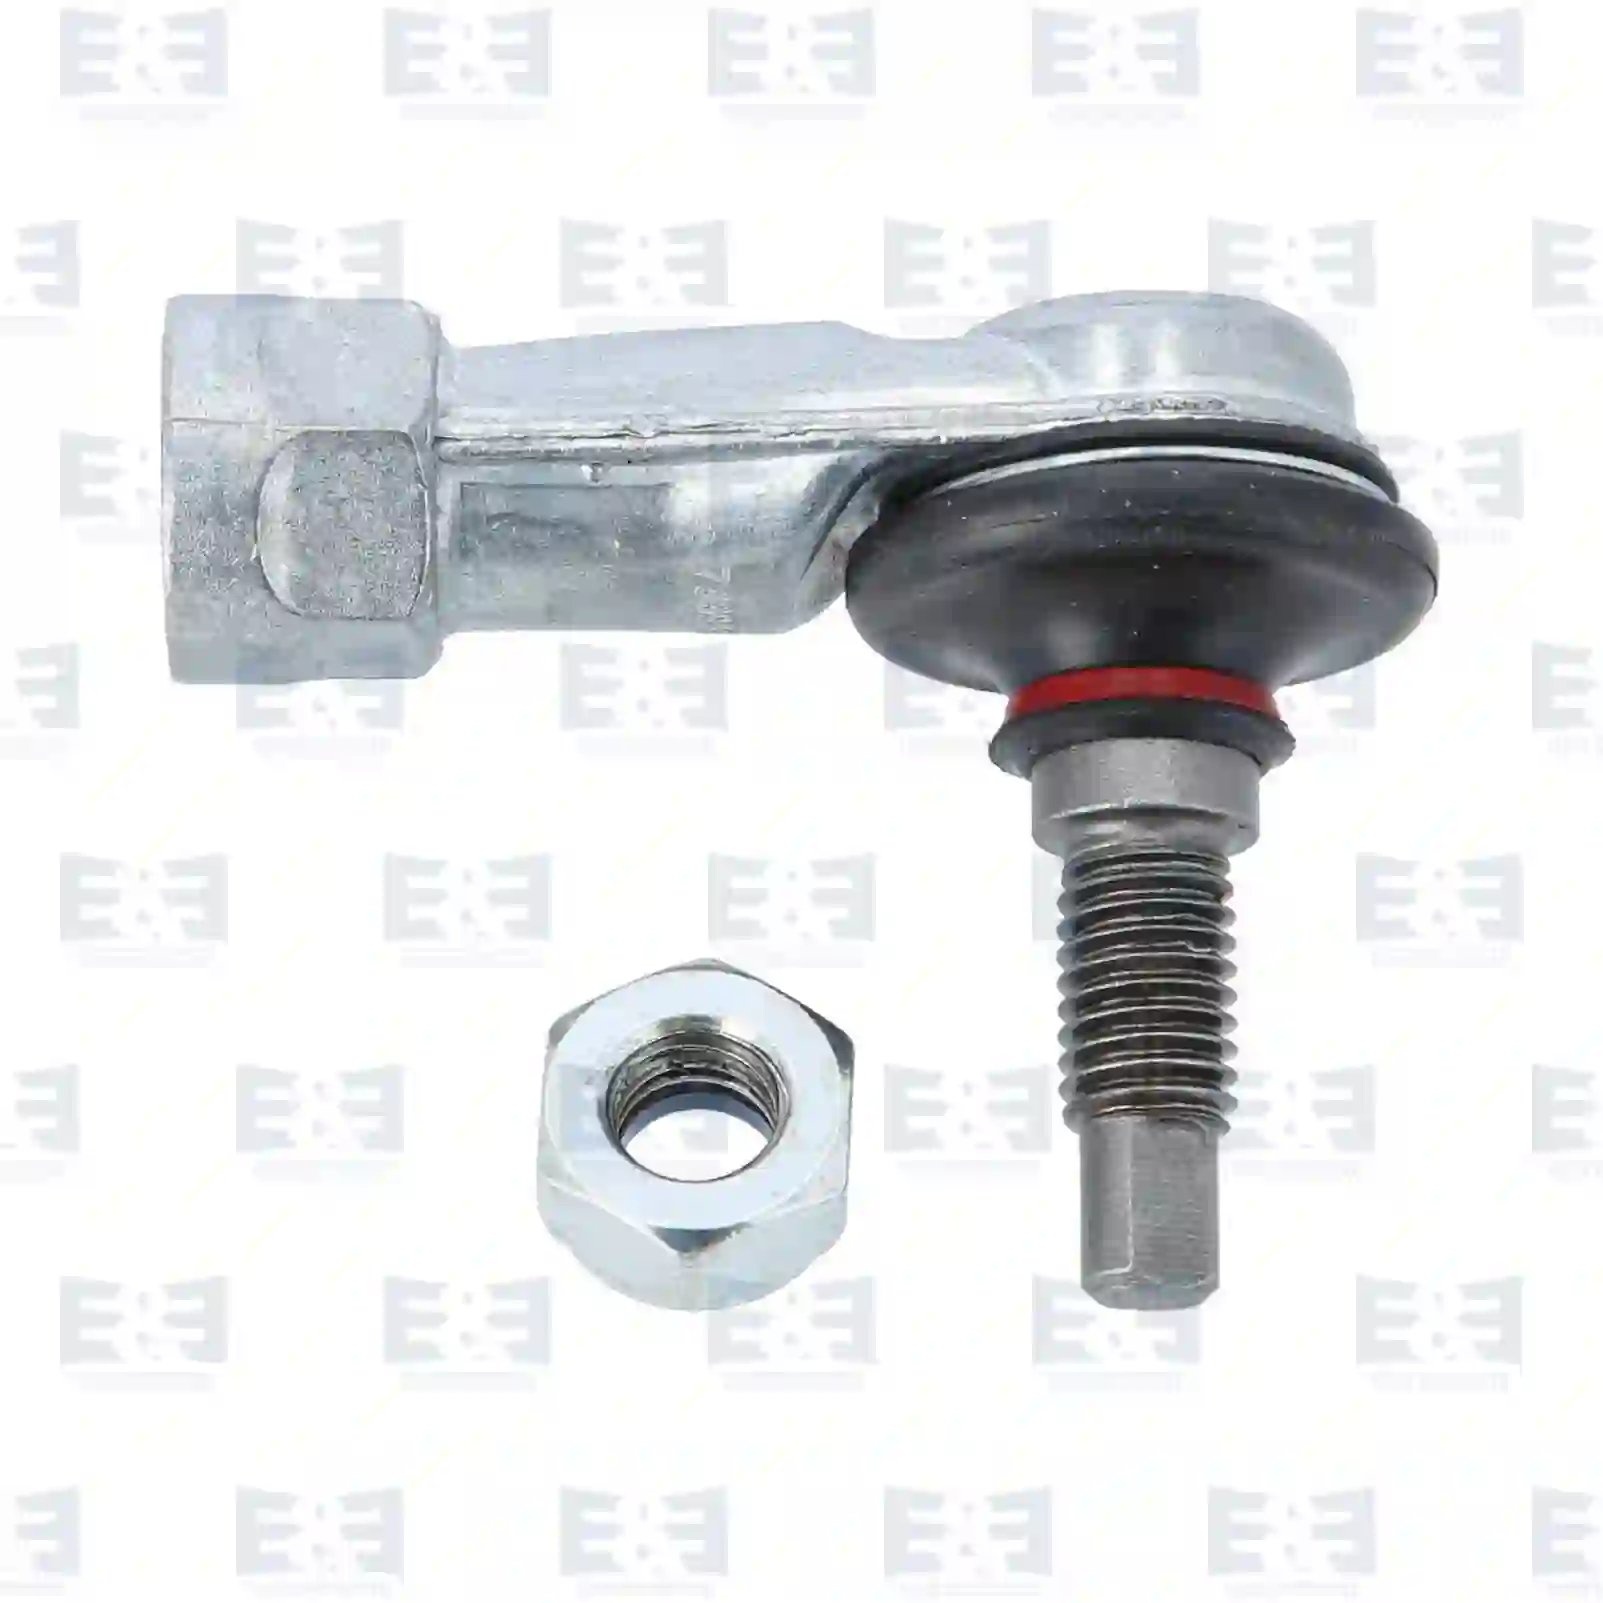 Gear Shift Lever Ball joint, right hand thread, EE No 2E2279358 ,  oem no:00021928, 3140852R1, 0589333, 0656085, 1249129, 140362, 589333, 656085, 652261, 08198188, 42485639, 7394146, 08198188, 42485639, 08198188, 42485639, 503136164, 8198188, 2150021100, 500687408, 81953016064, 81953016130, 81953016170, 81953016173, 90900989010, 0002684689, 0002685189, 0002686289, 0002688289, 0002689689, 3662680389, 011010219, 5010129530, 1384898, 305320, 371452, 421326, 523744, 525733, 527056, 0928500080, 99100240090, 1190131, 11901311, 1696685, ZG40138-0008 E&E Truck Spare Parts | Truck Spare Parts, Auotomotive Spare Parts